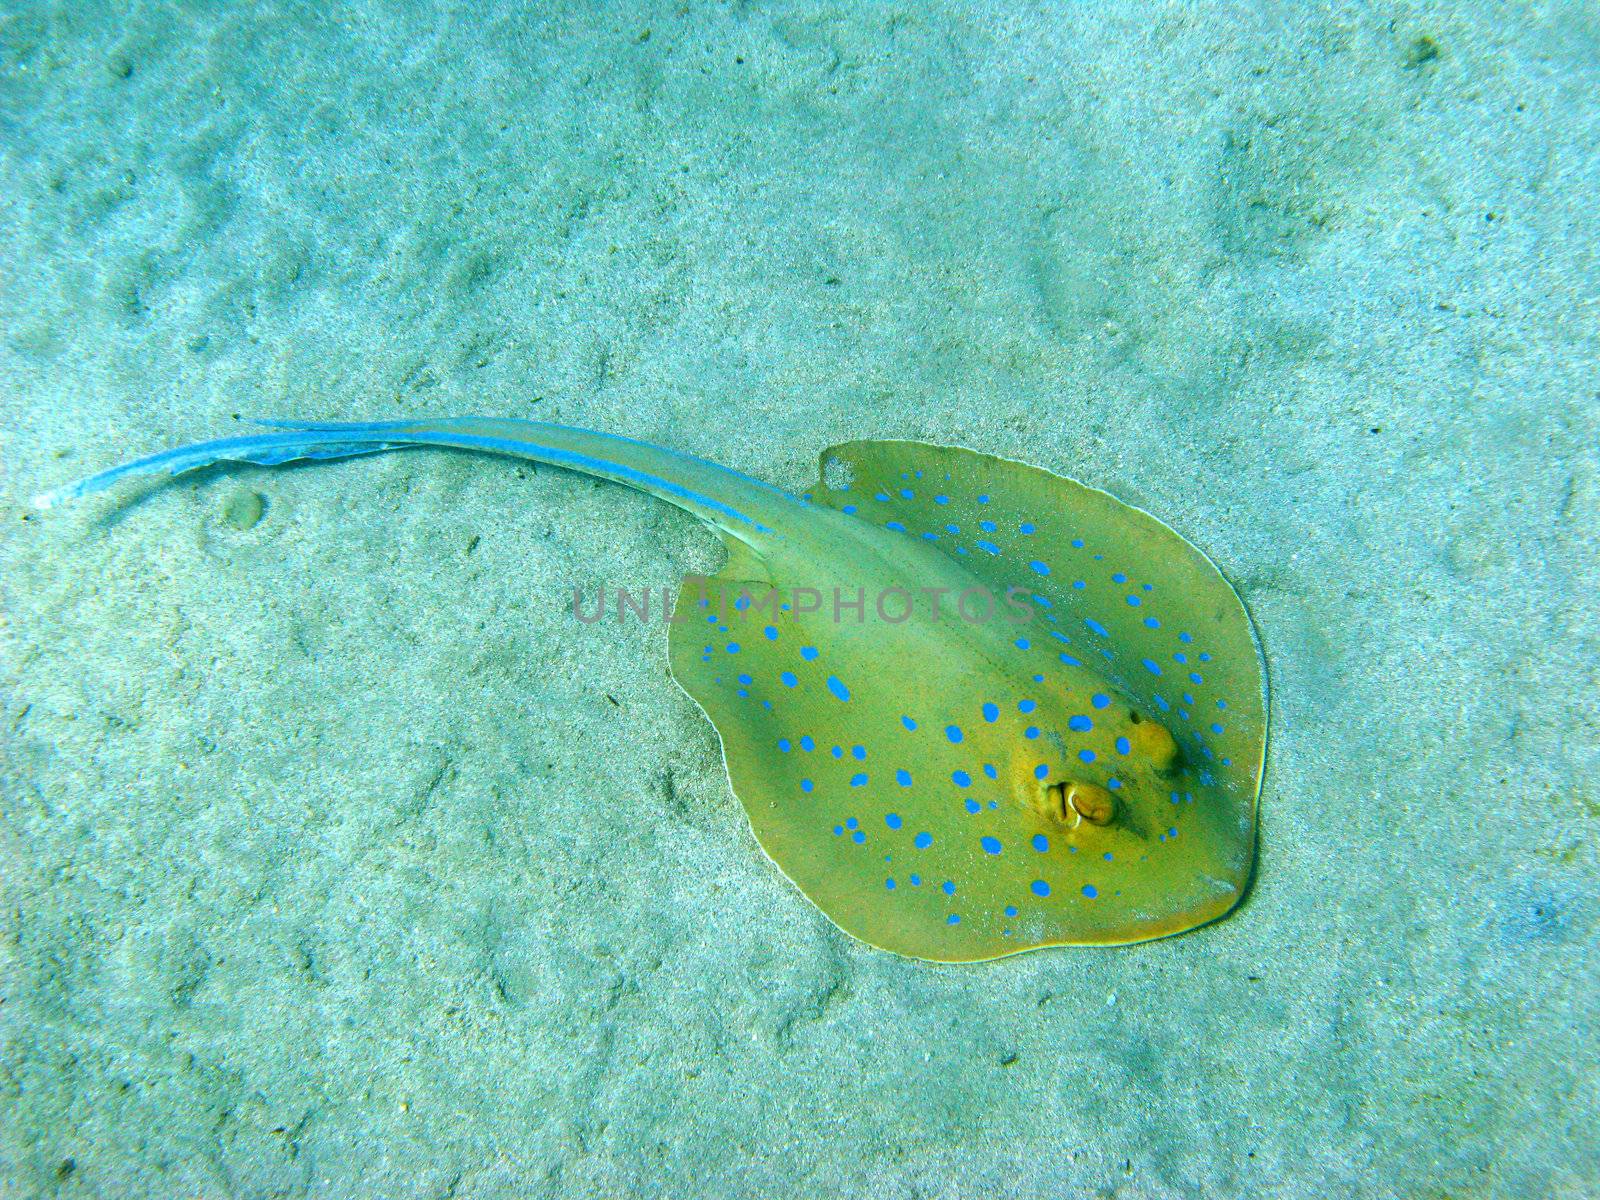 Blue-spotted stingray in Red sea, Abu Dabab